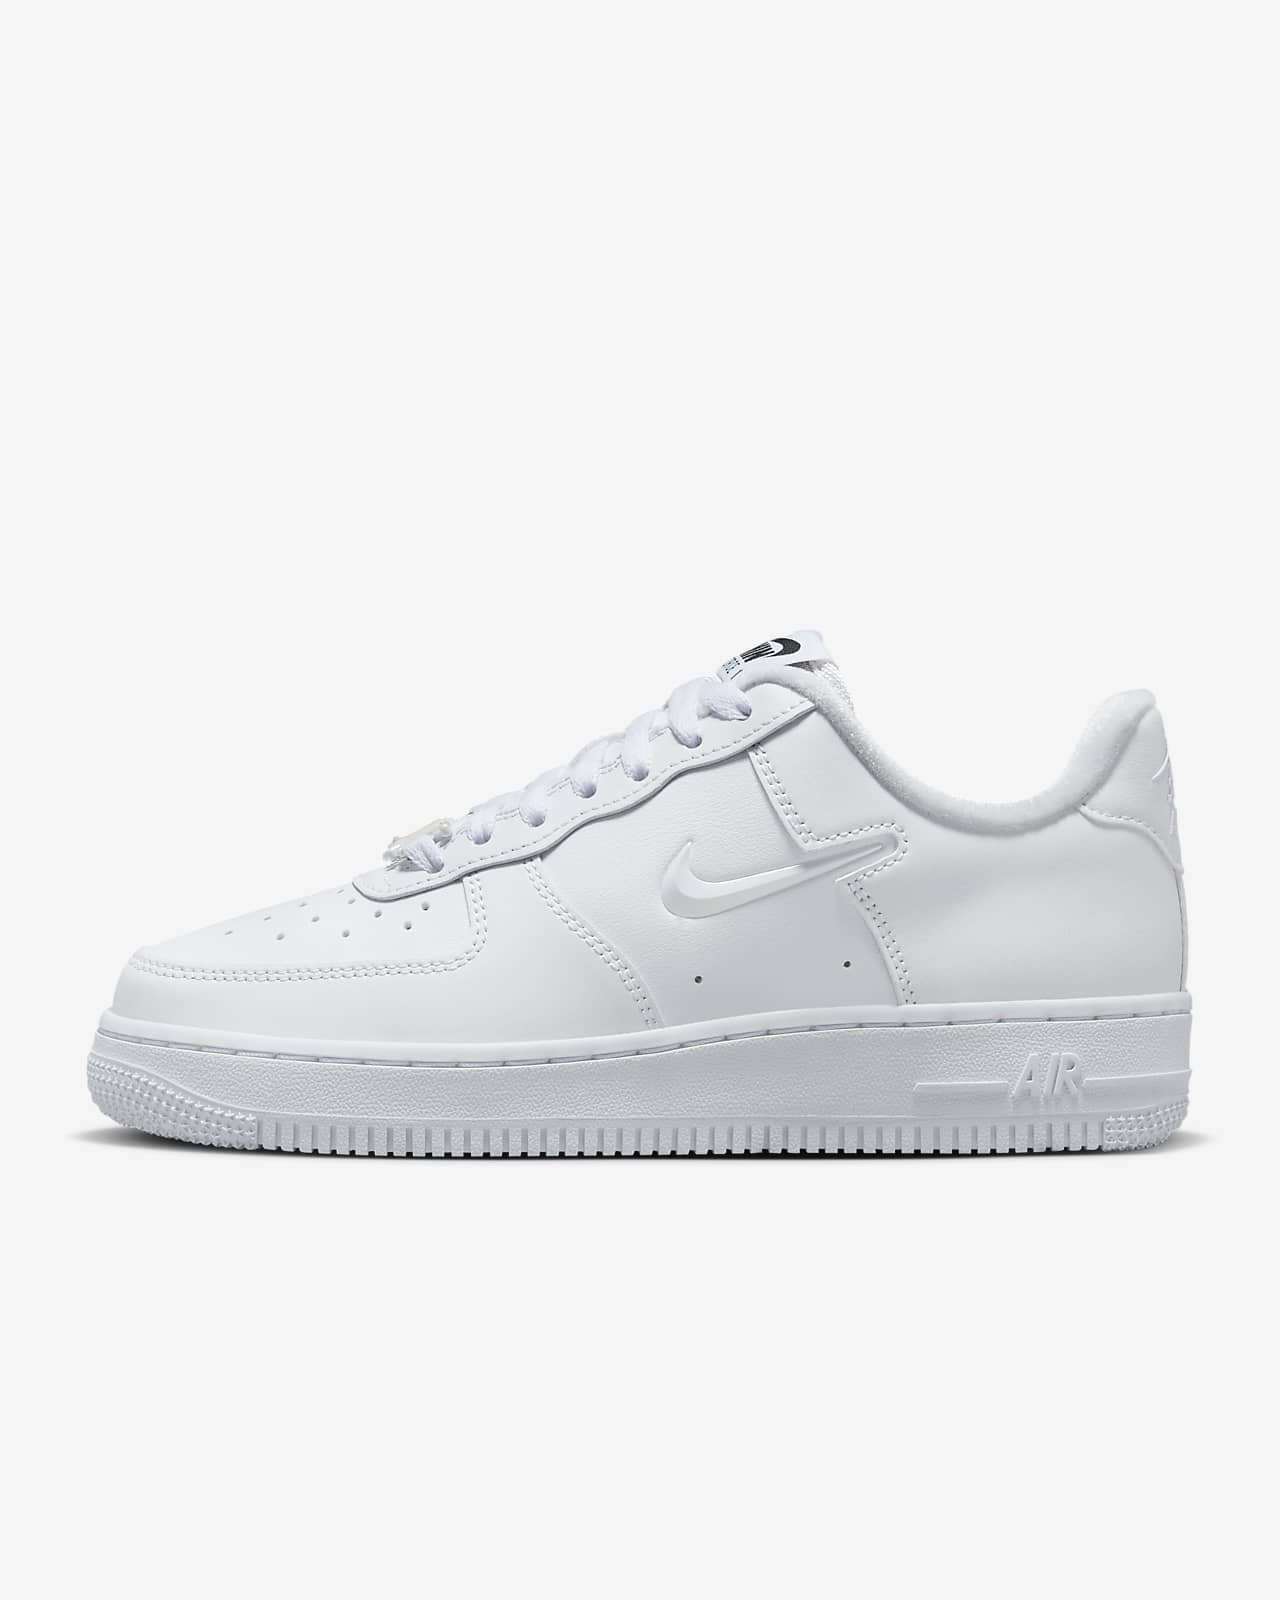 nike air force 1 07 women's shoes